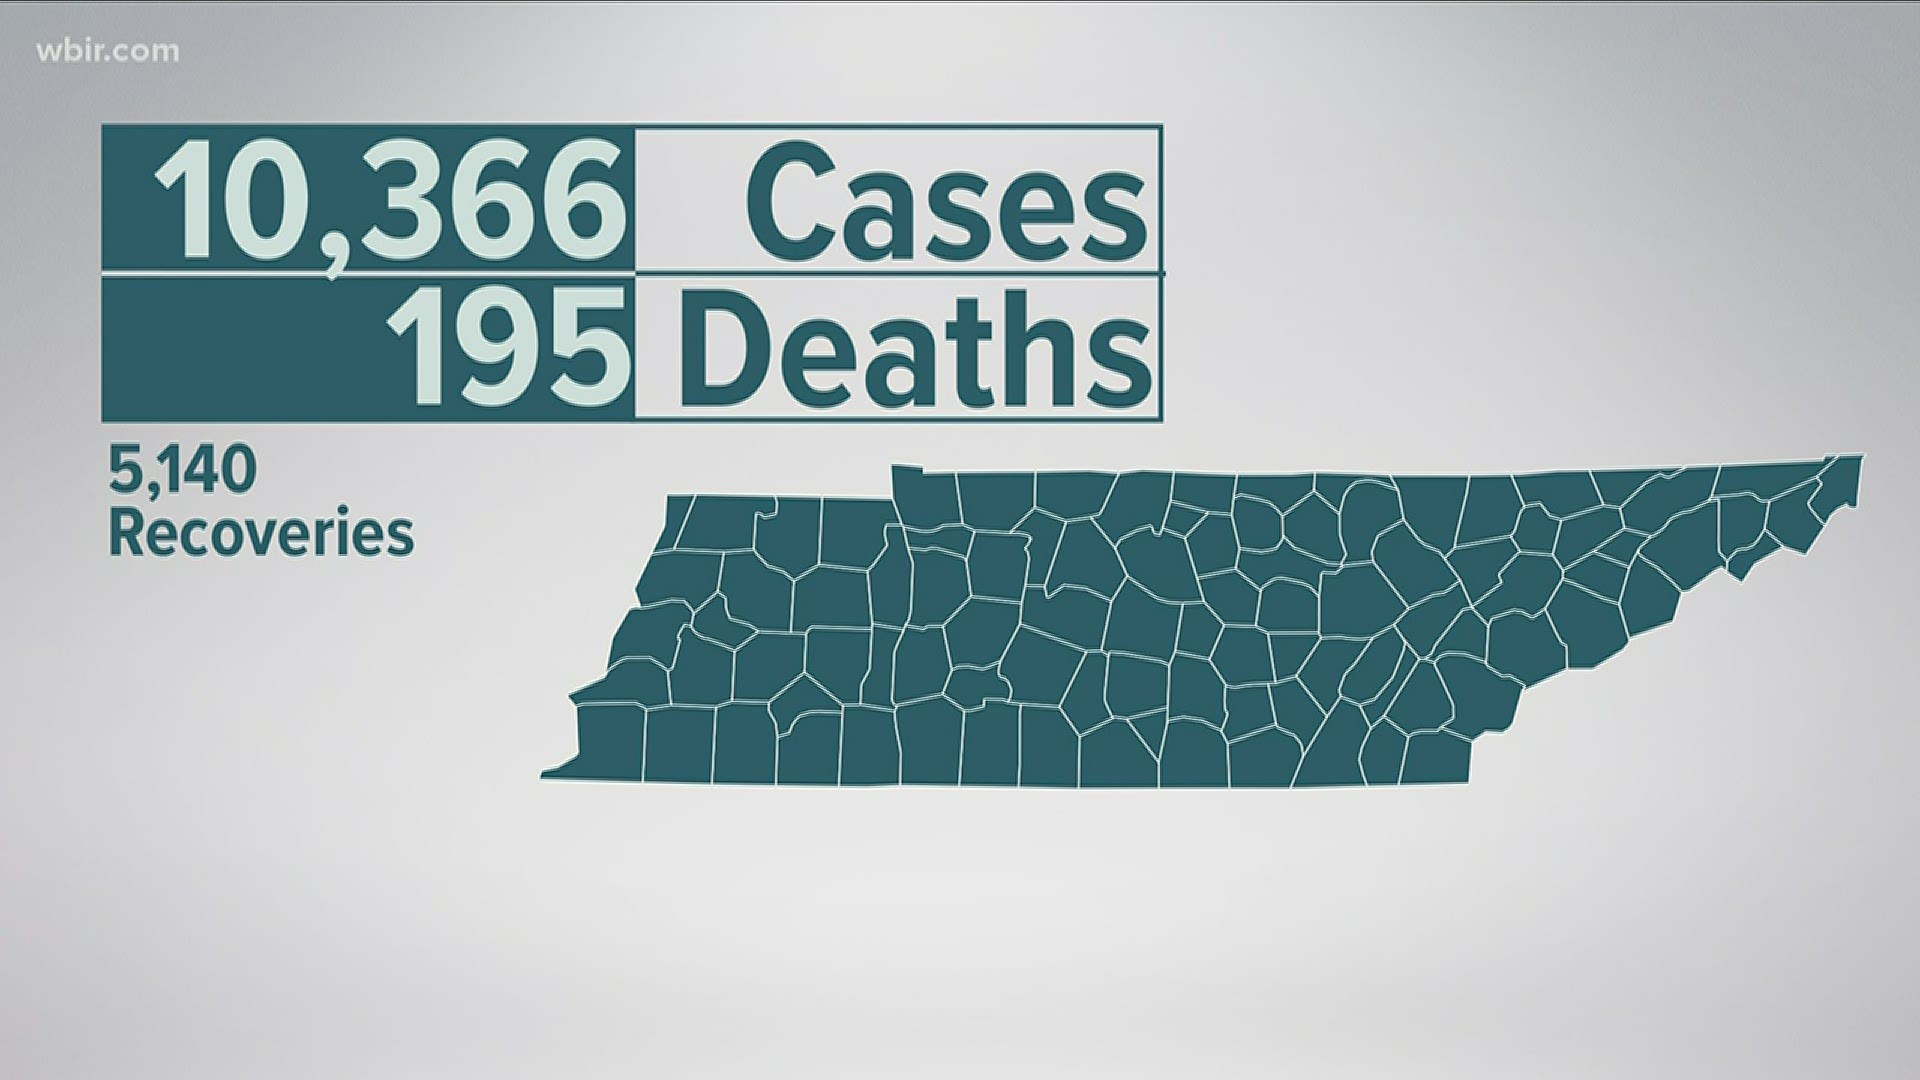 Tennessee officials reported that there were 10,366 cases of coronavirus confirmed in Tennessee.